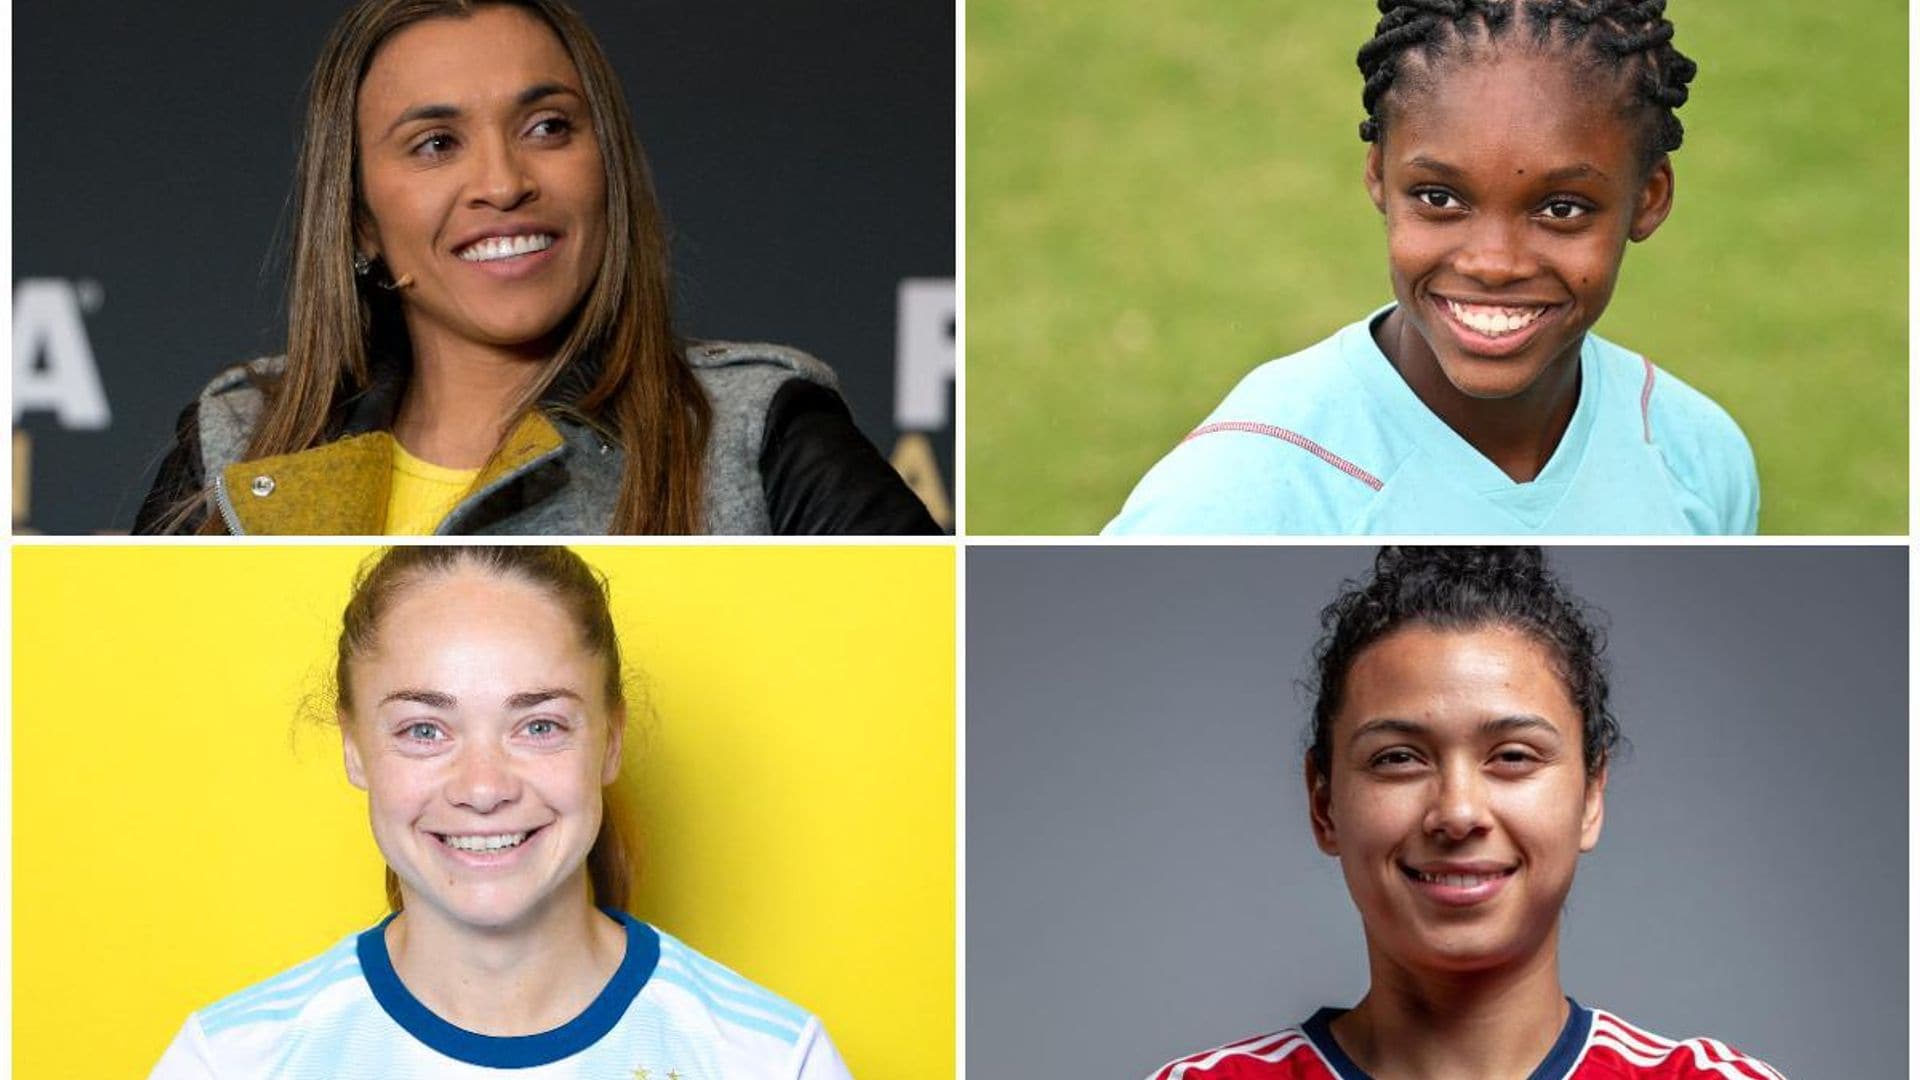 Latin stars in the Women's Soccer World Cup